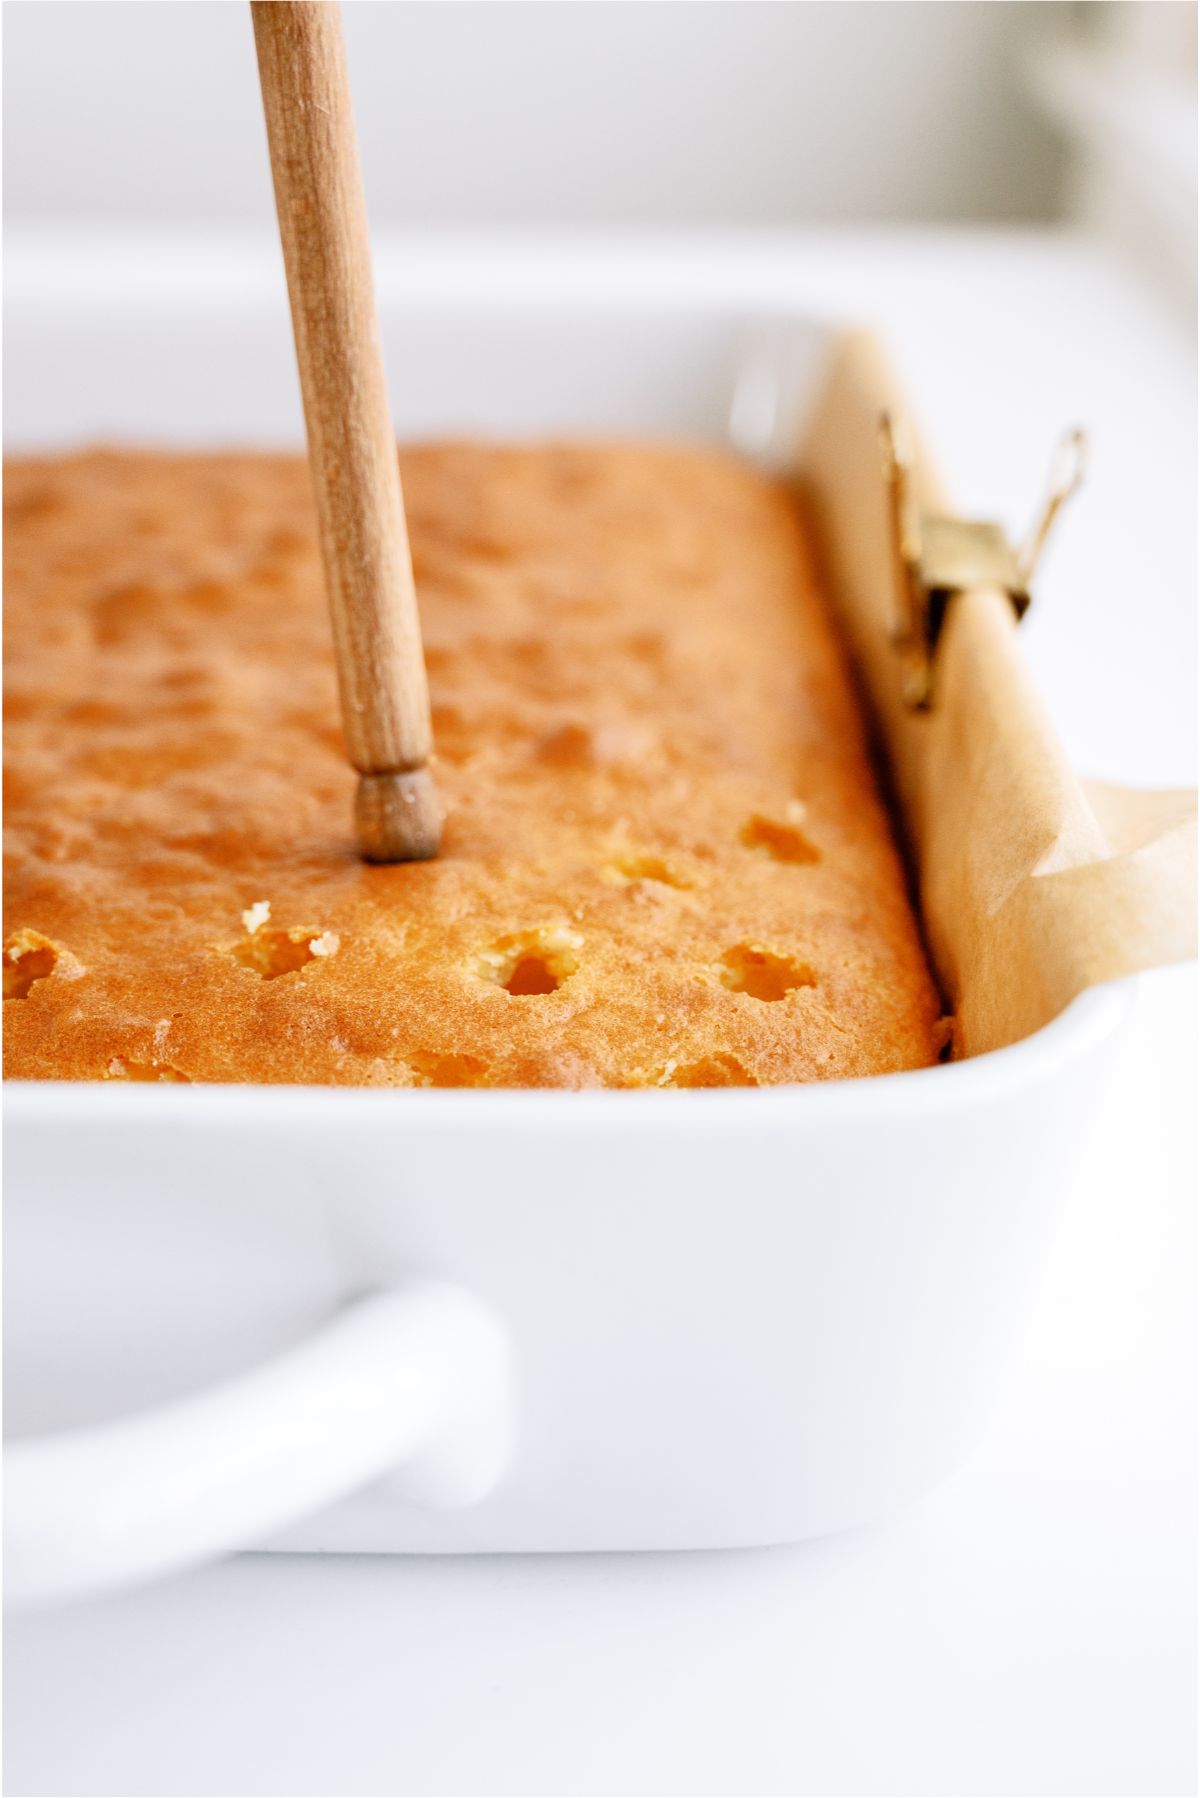 Poking holes in a baked yellow cake with the end of a wooden spoon